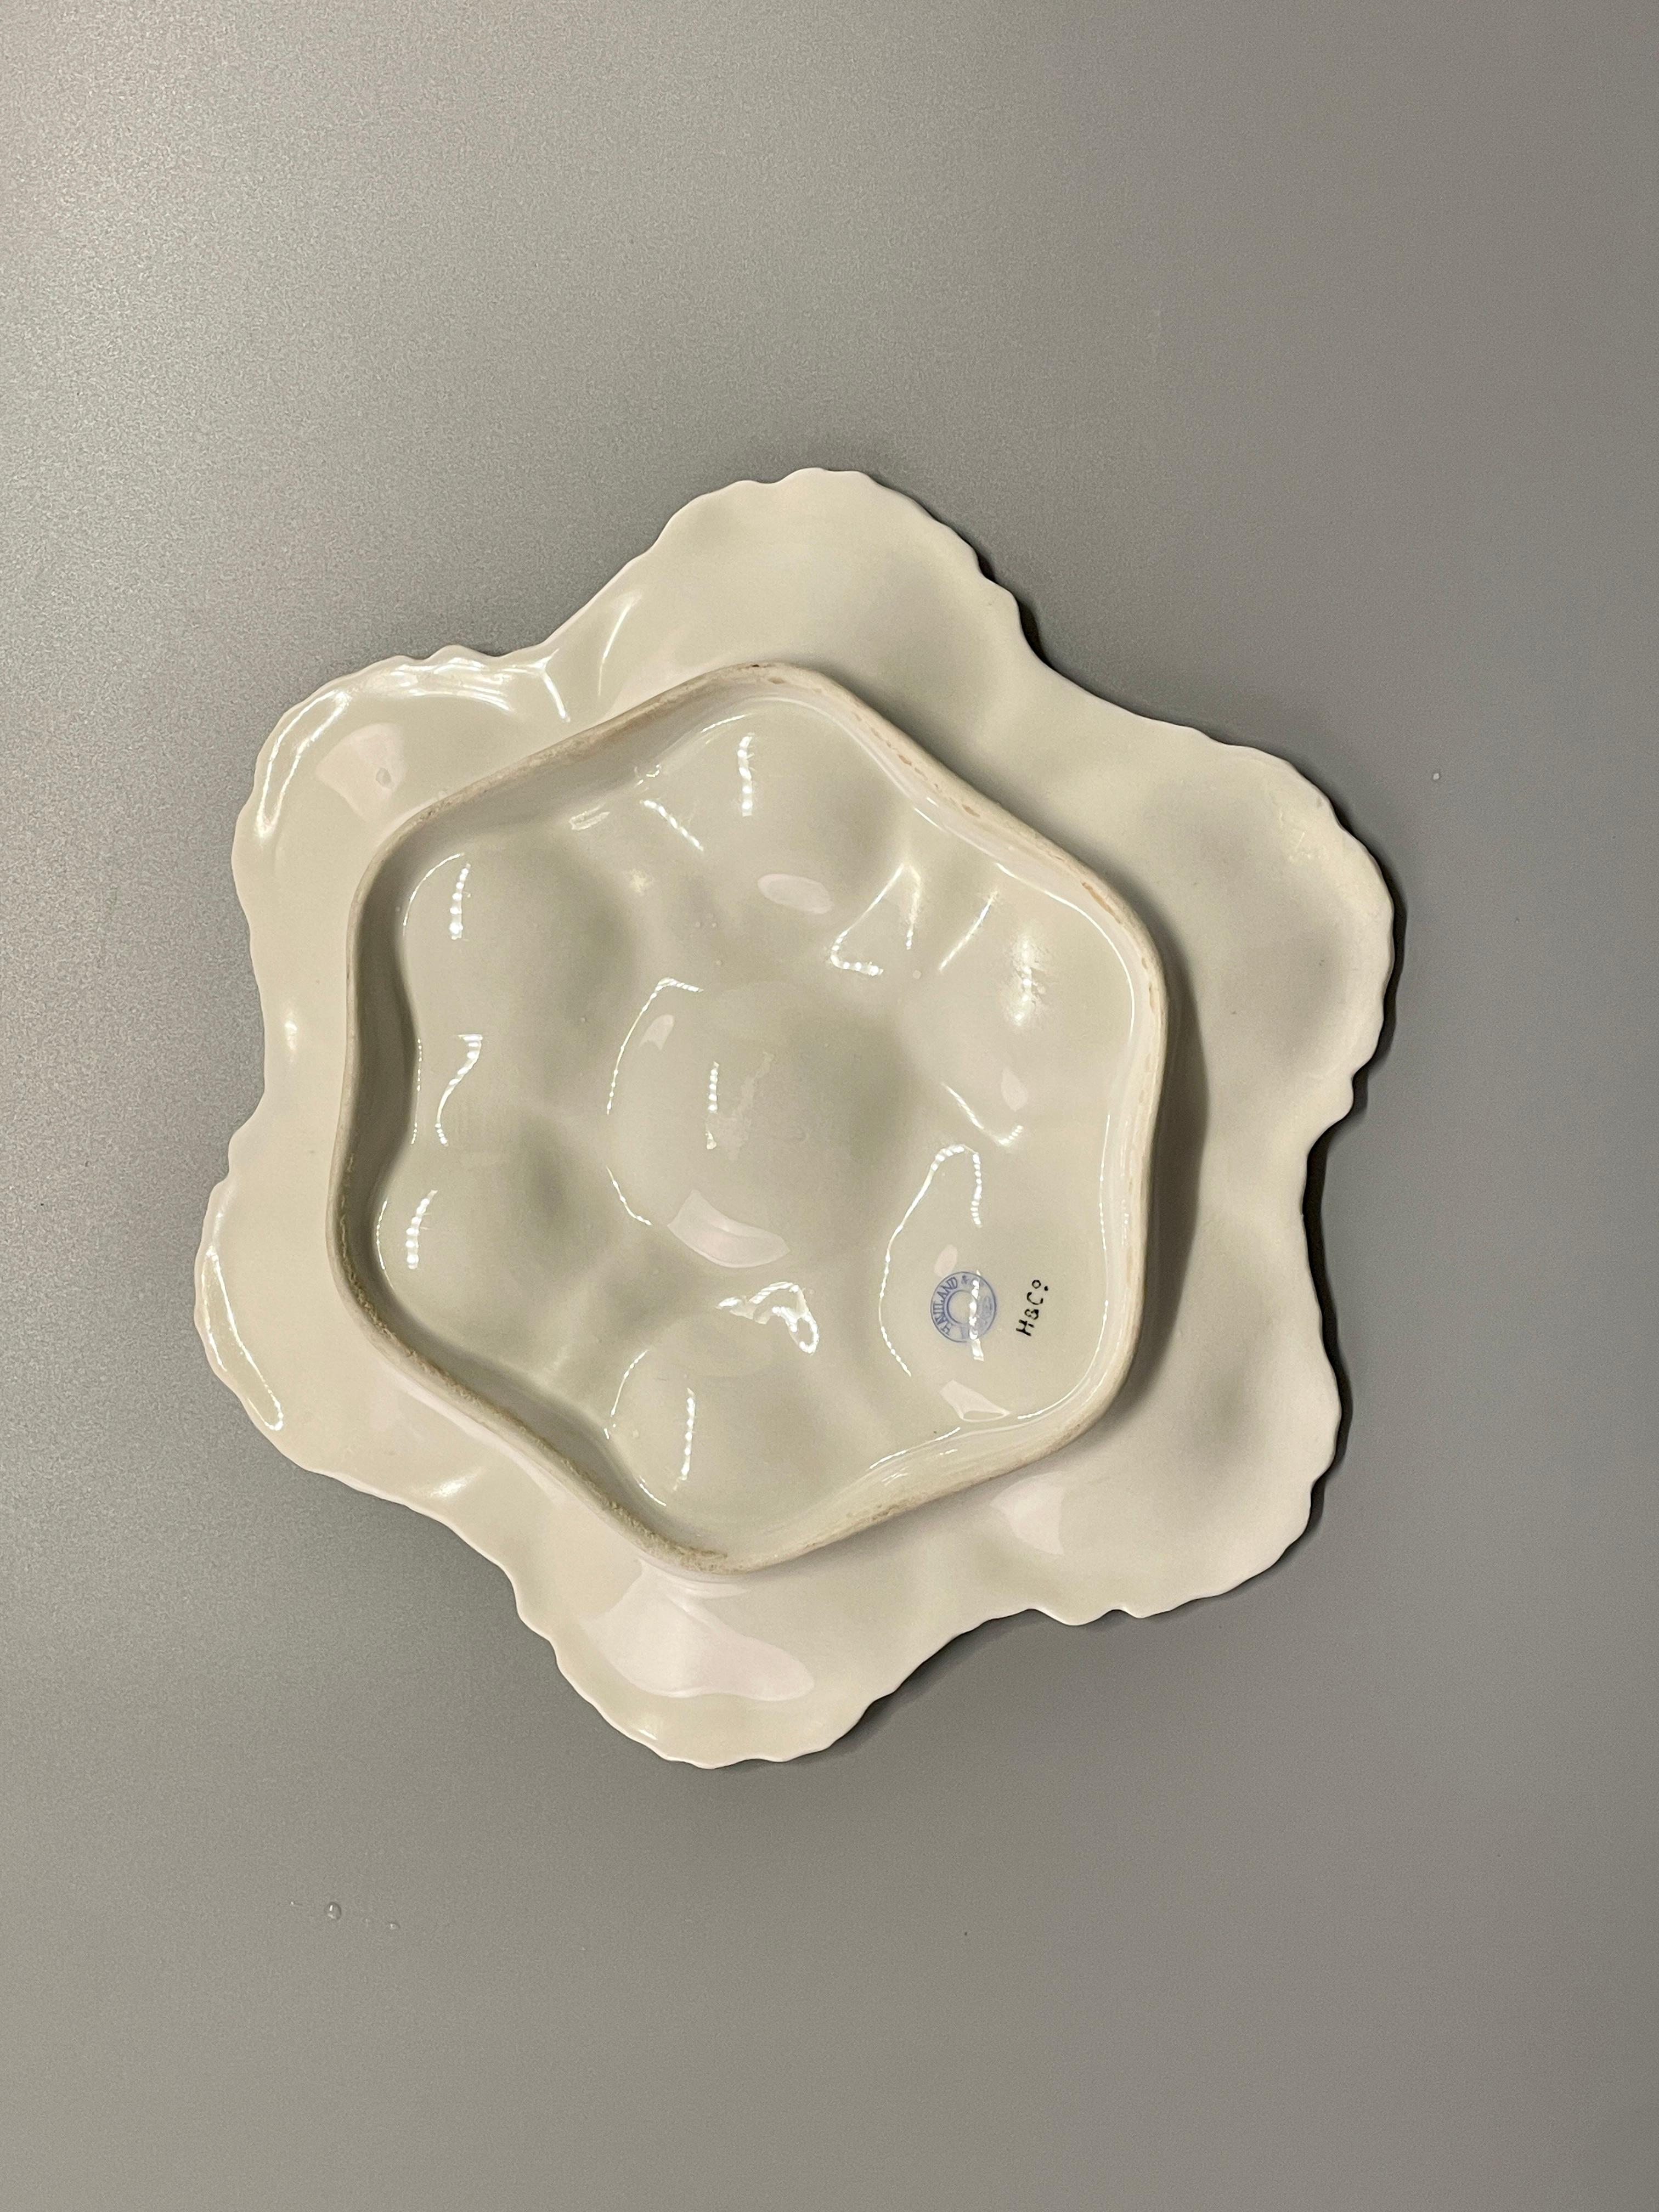 Early 20th c French Porcelain Oyster Plates, Limoges, set of 4 For Sale 2